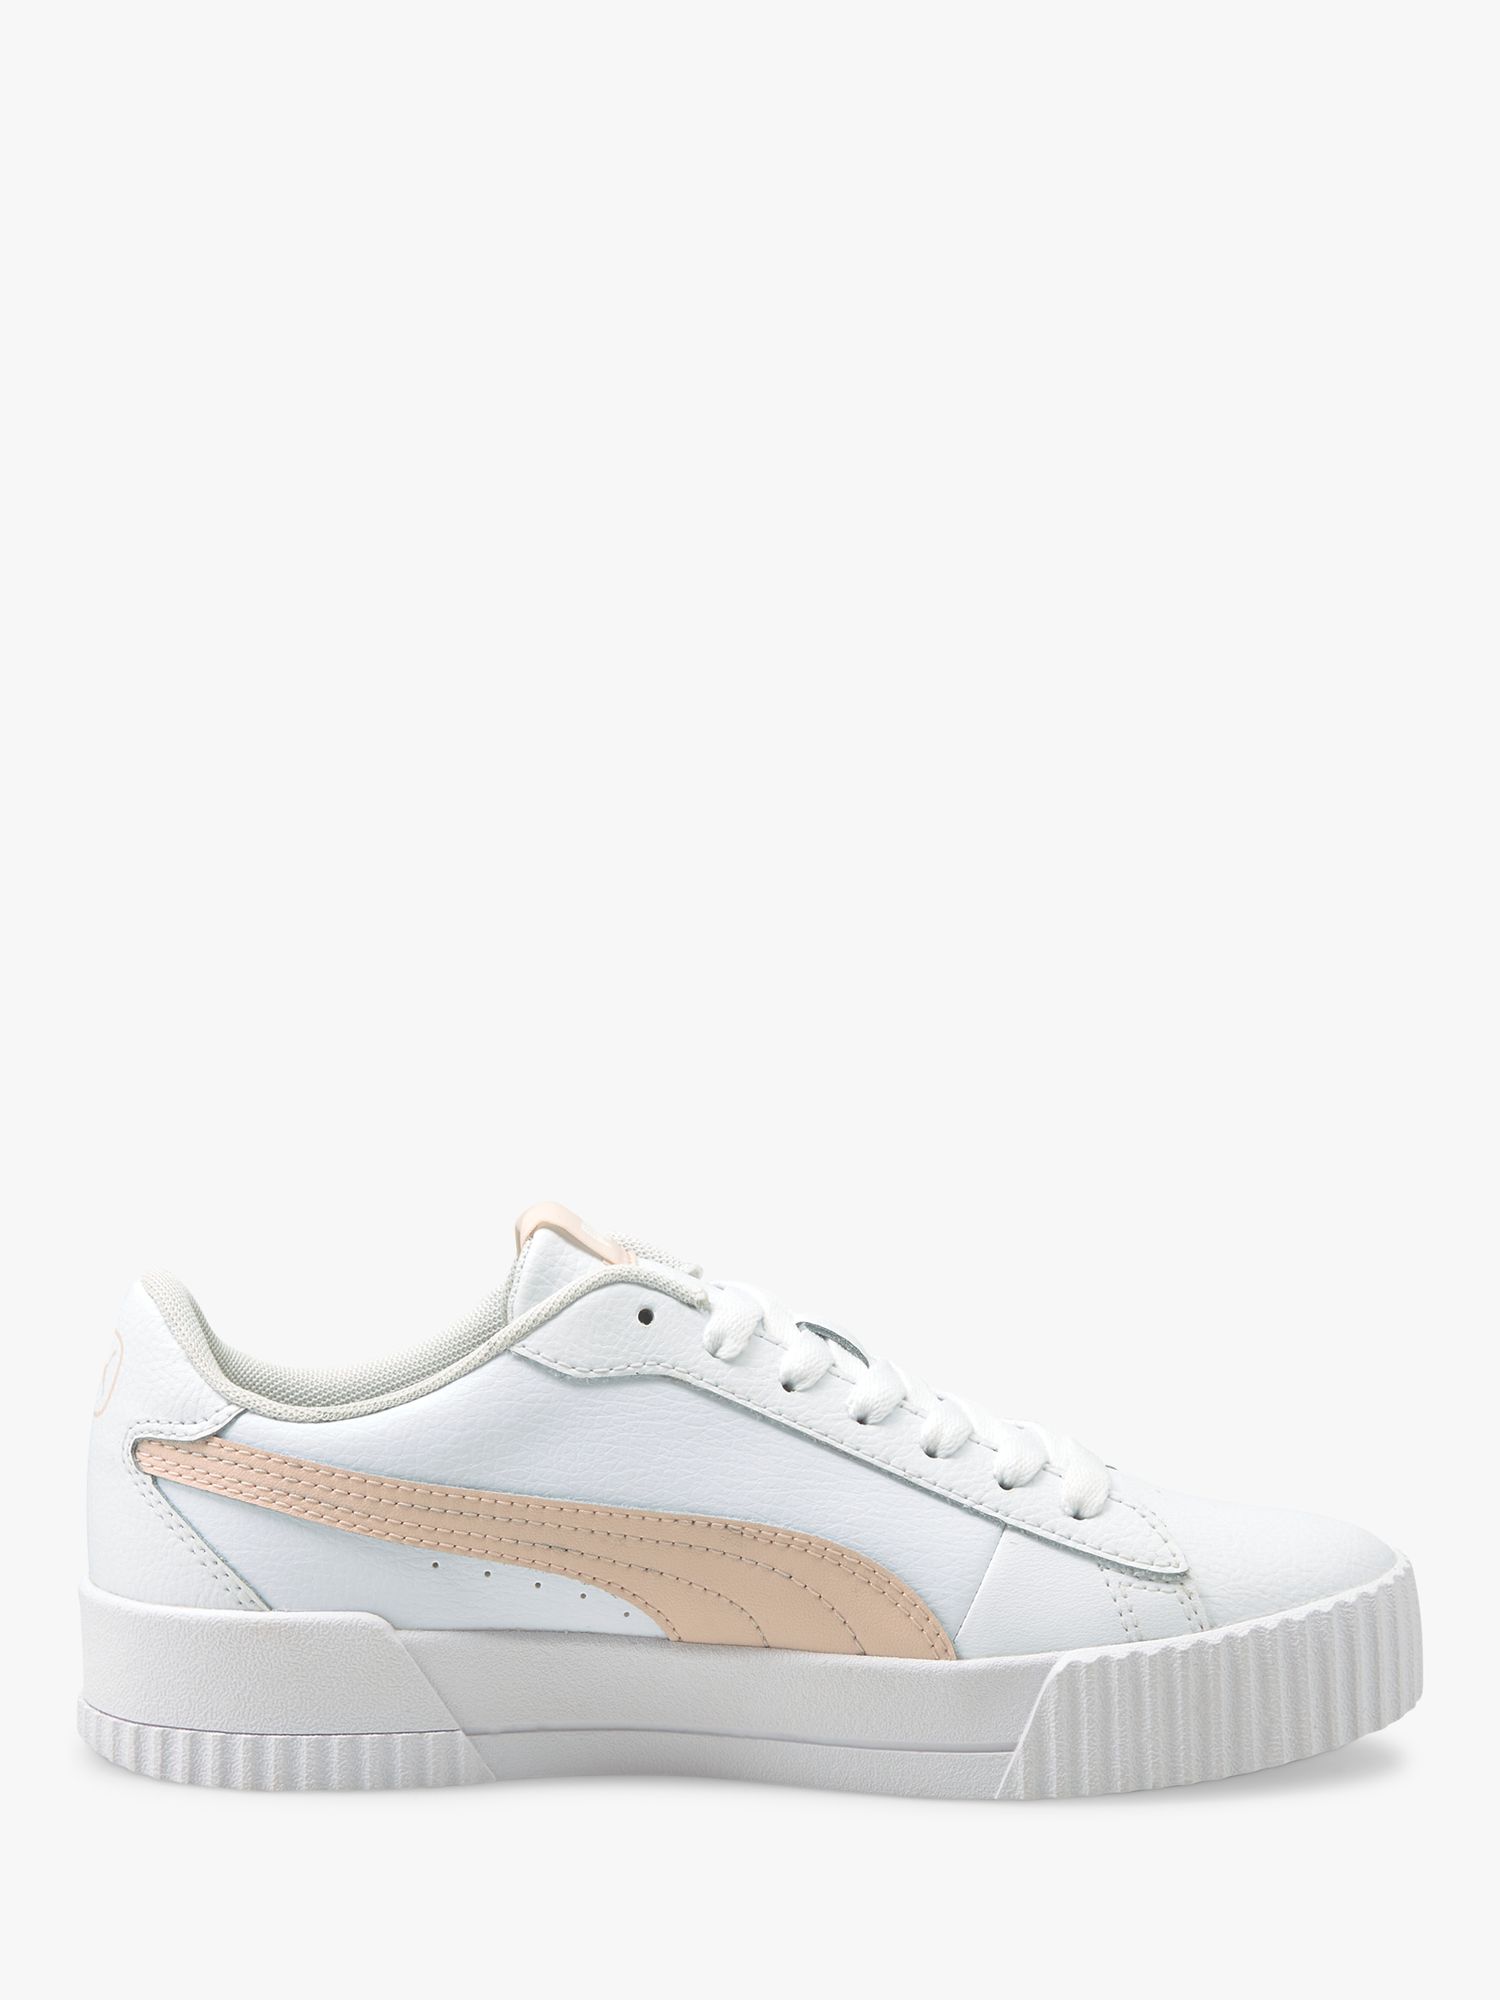 PUMA Carina Crew Leather Trainers, White/Pink at John Lewis & Partners